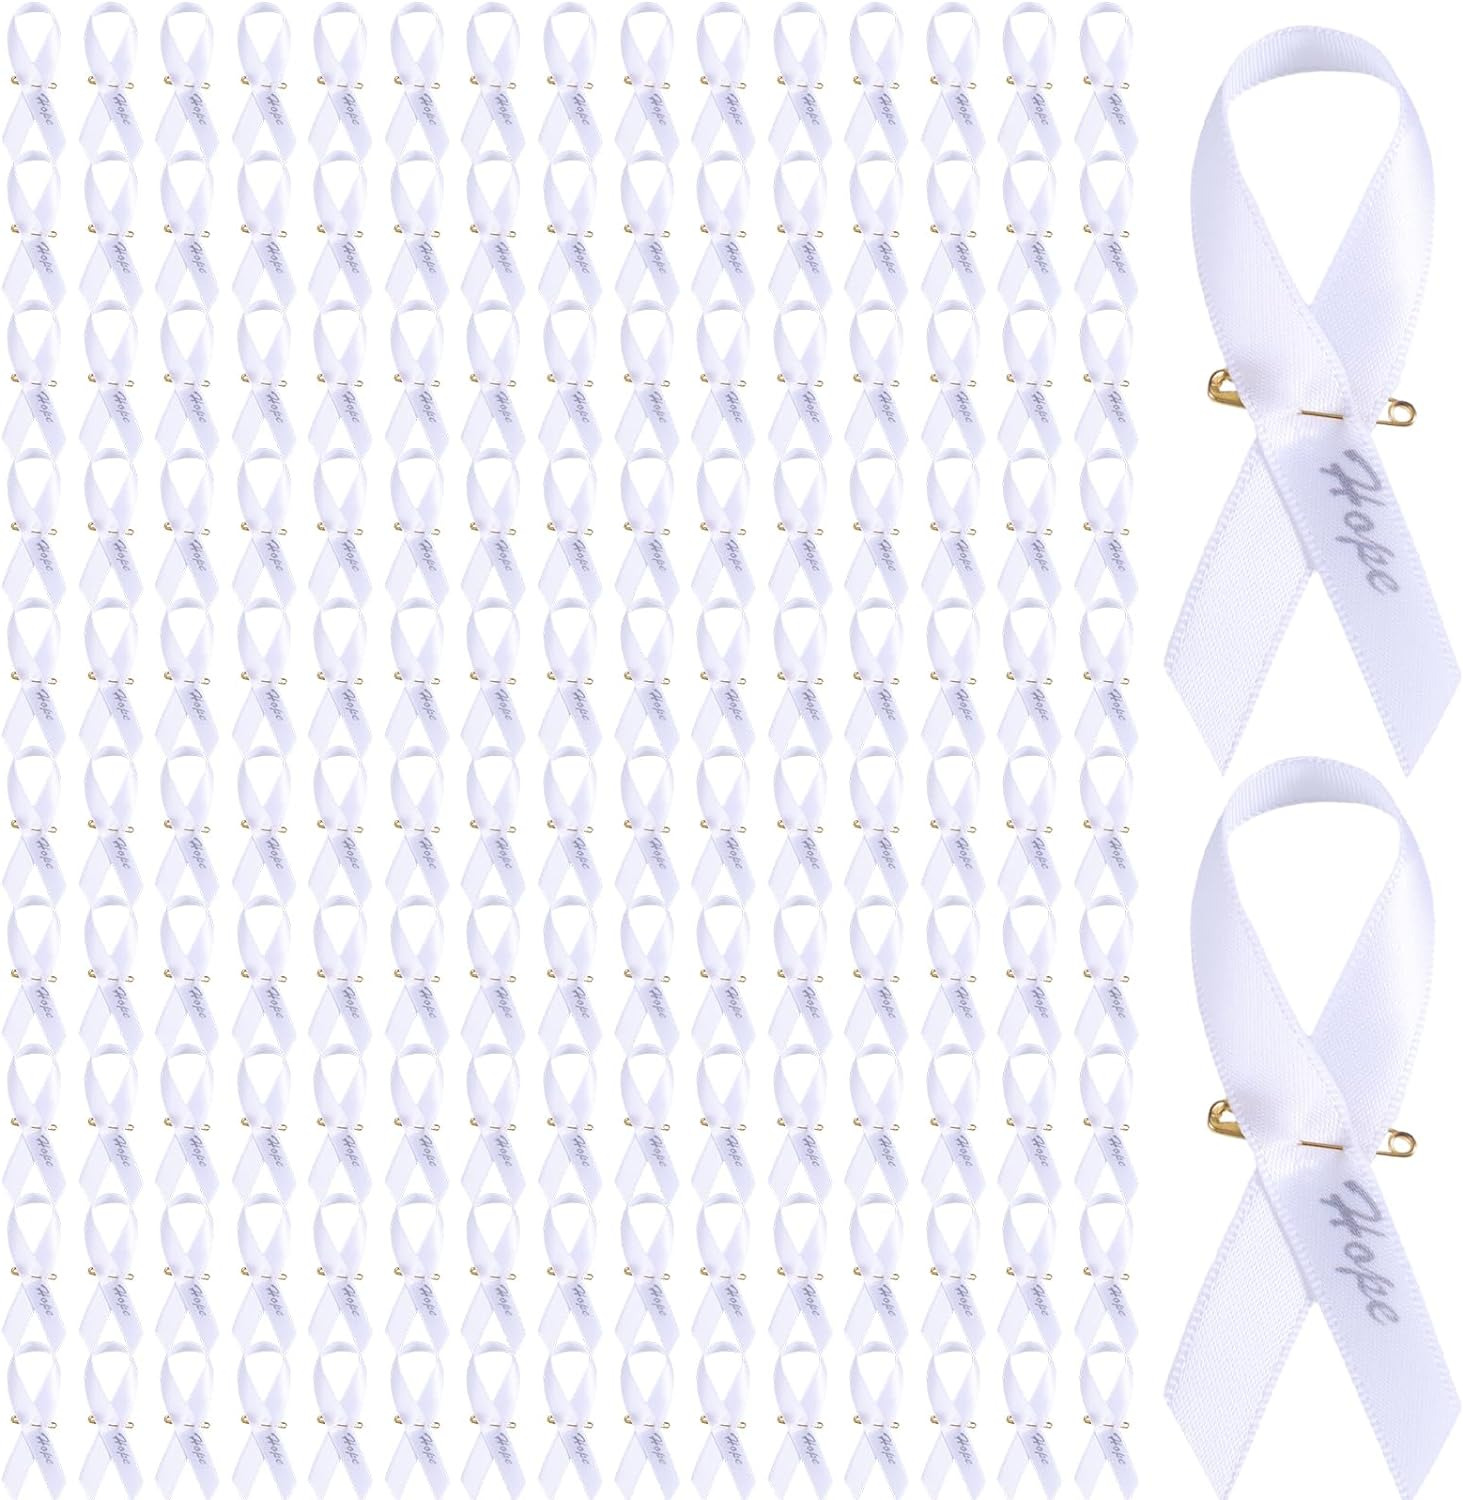 Hanaive 150 Set Lung Cancer Awareness Ribbons White Ribbons with Pins Lung Cance